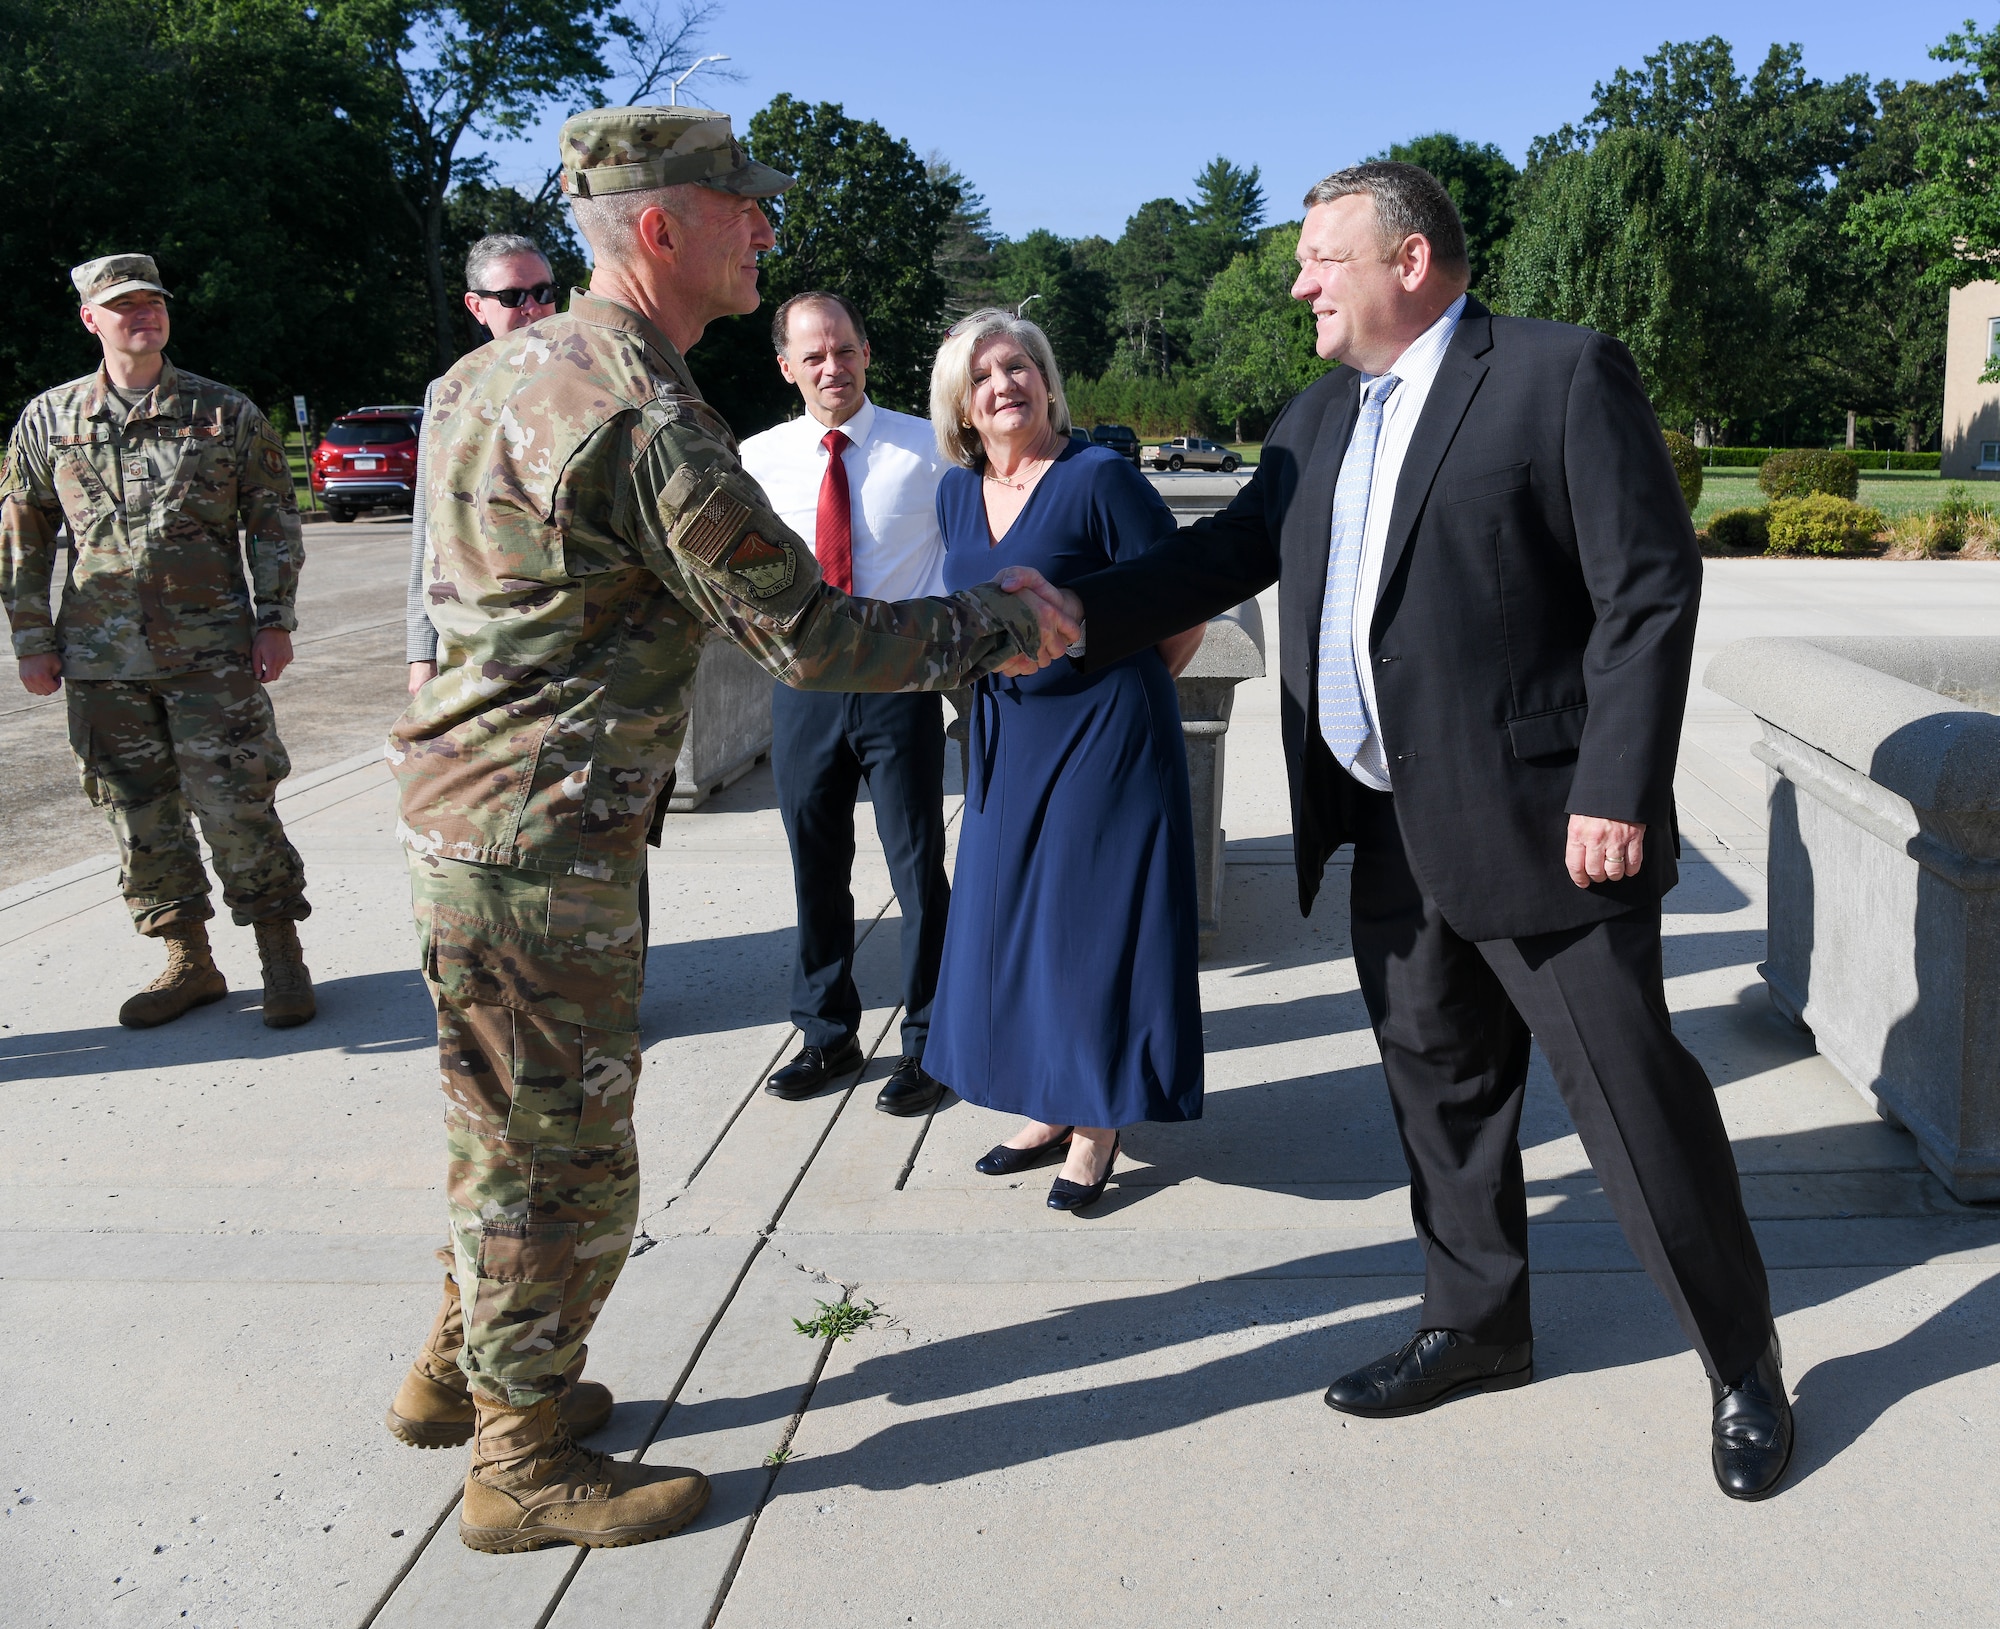 Maj. Gen. Christopher Azzano, commander, Air Force Test Center, is greeted by Brian Stacy, action officer, and AEDC leadership upon his arrival at Arnold Air Force Base, Tenn., June 30, 2021. (U.S. Air Force photo by Jill Pickett)